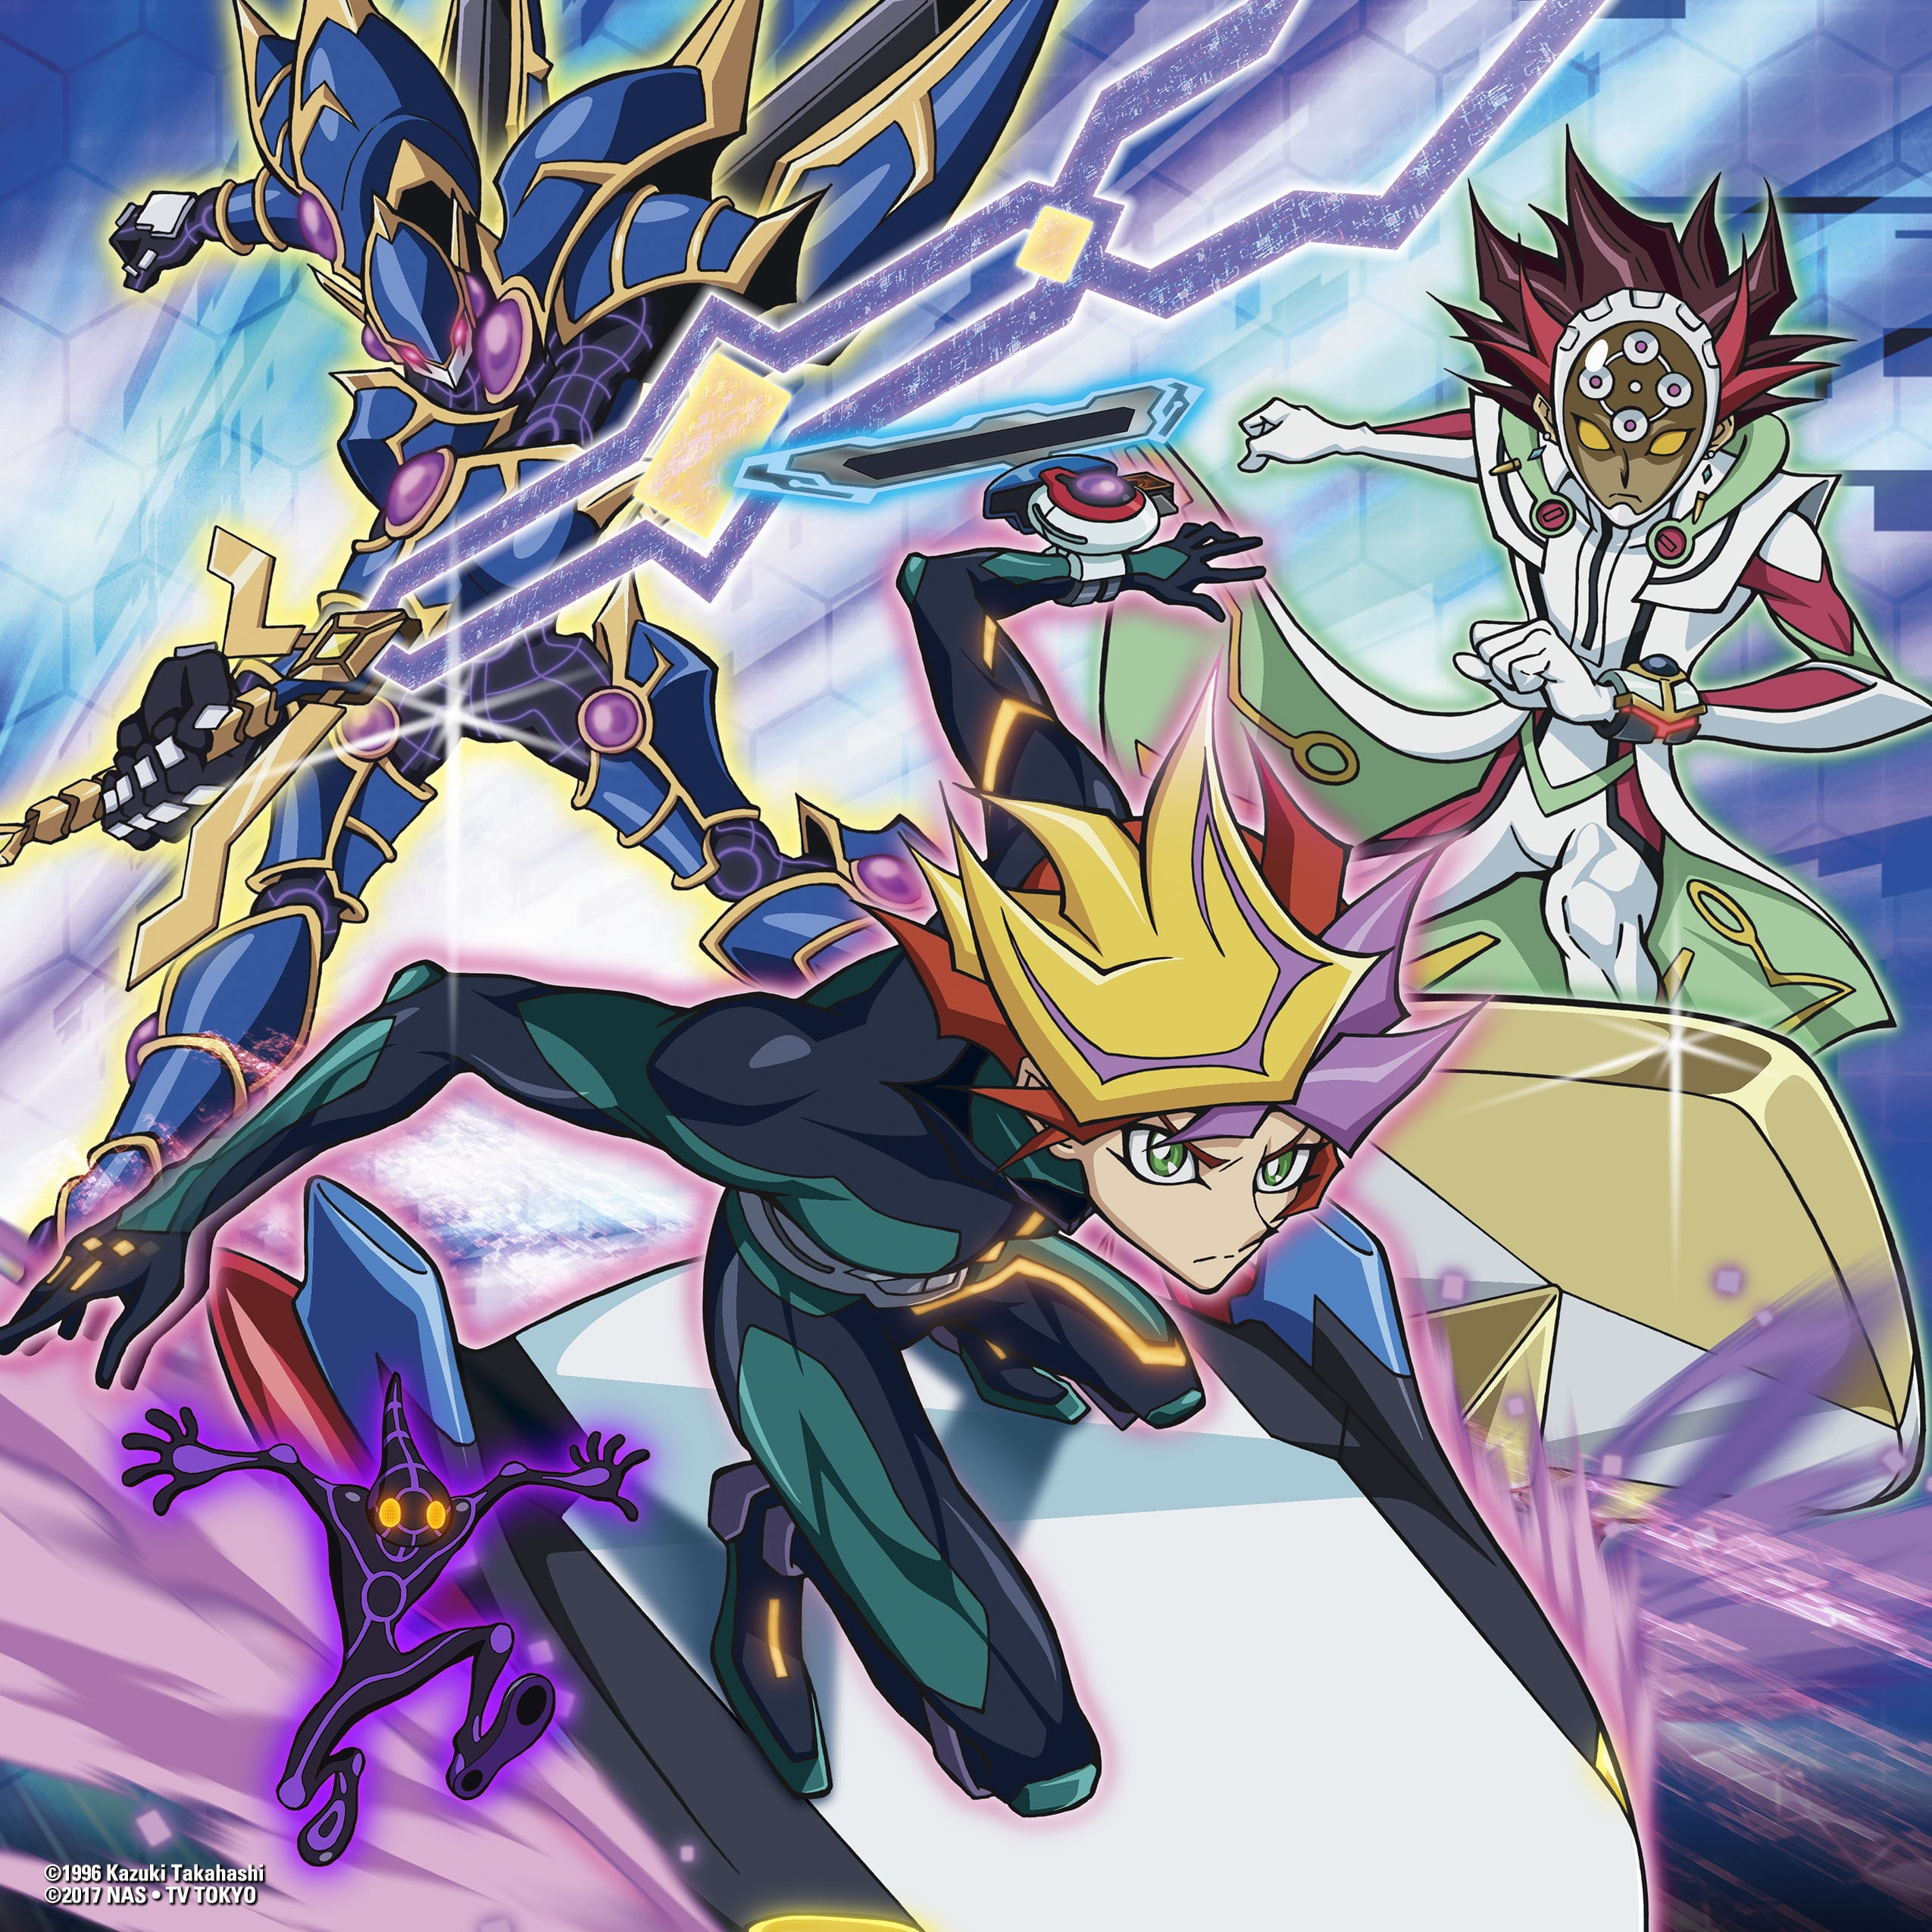 Back to Duel 2022 – Yu-Gi-Oh! New Zealand